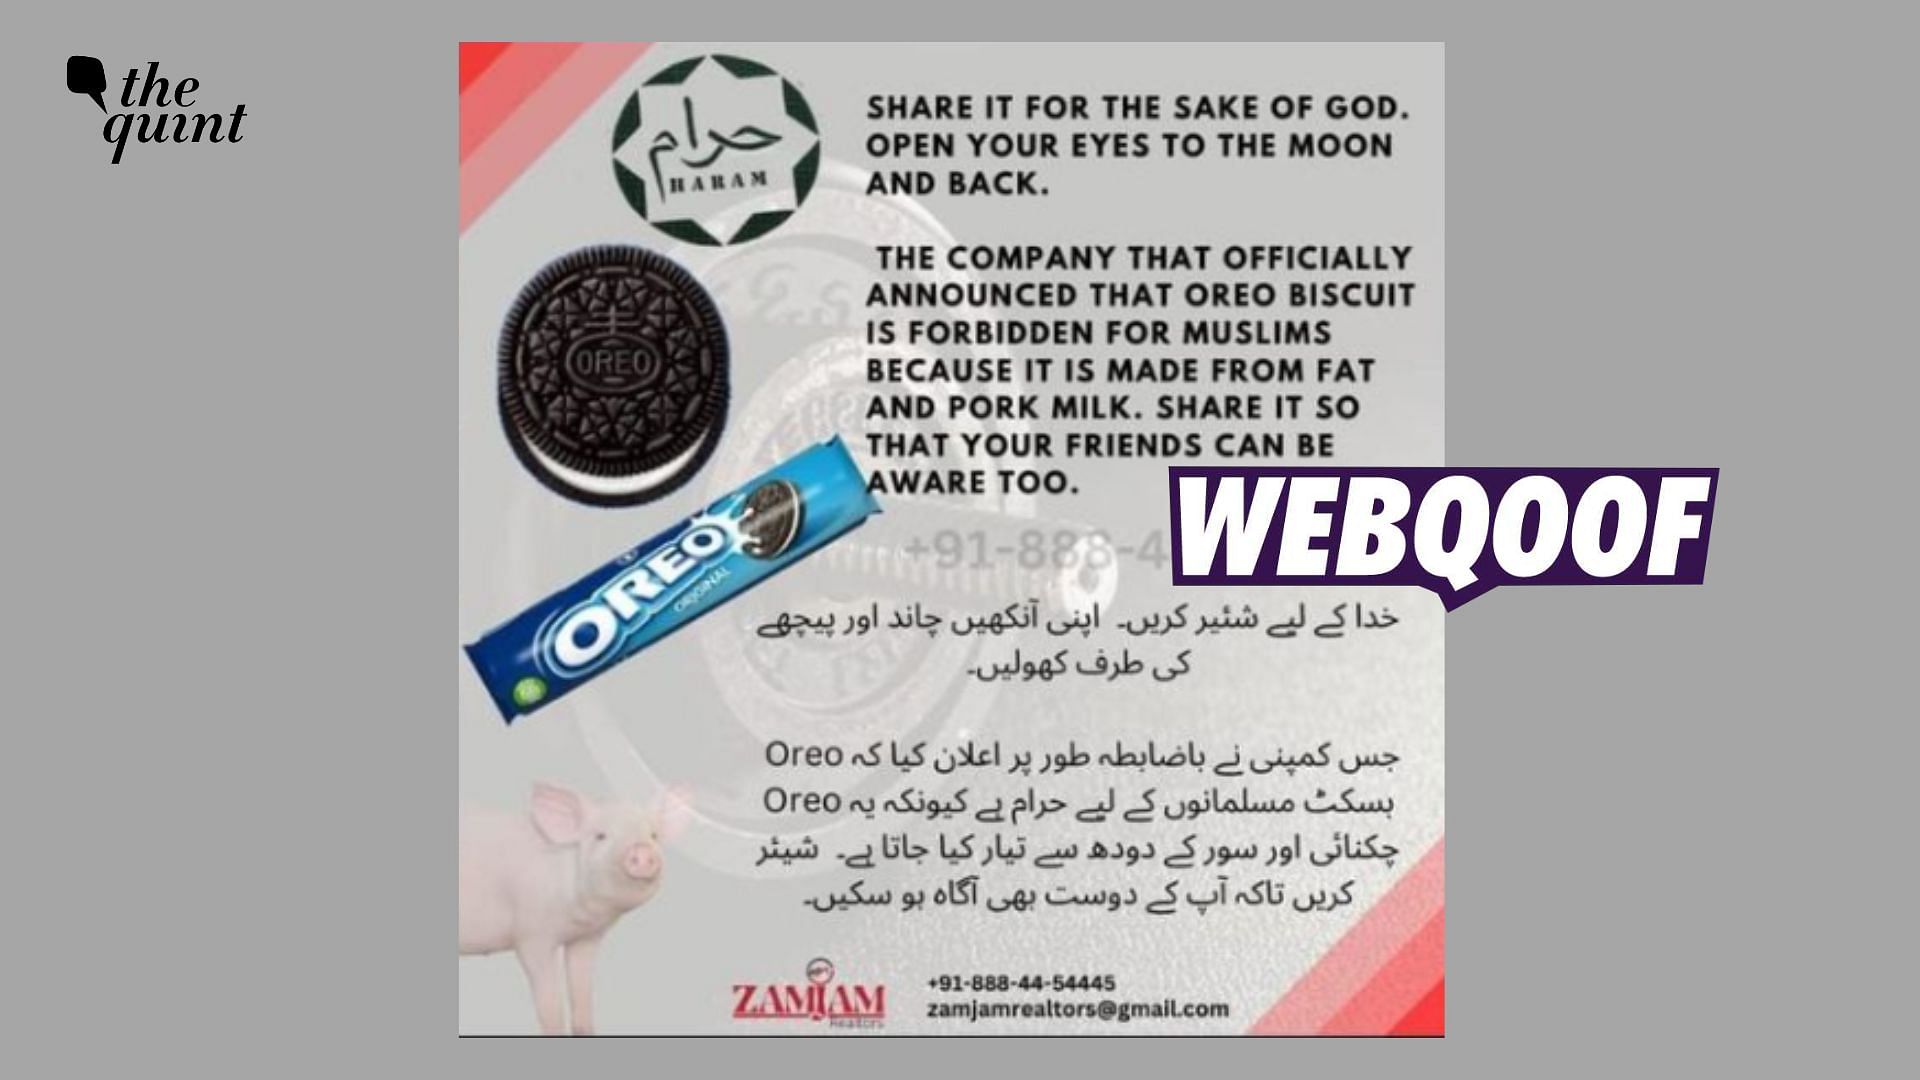 is oreo halal for muslim in the United States?